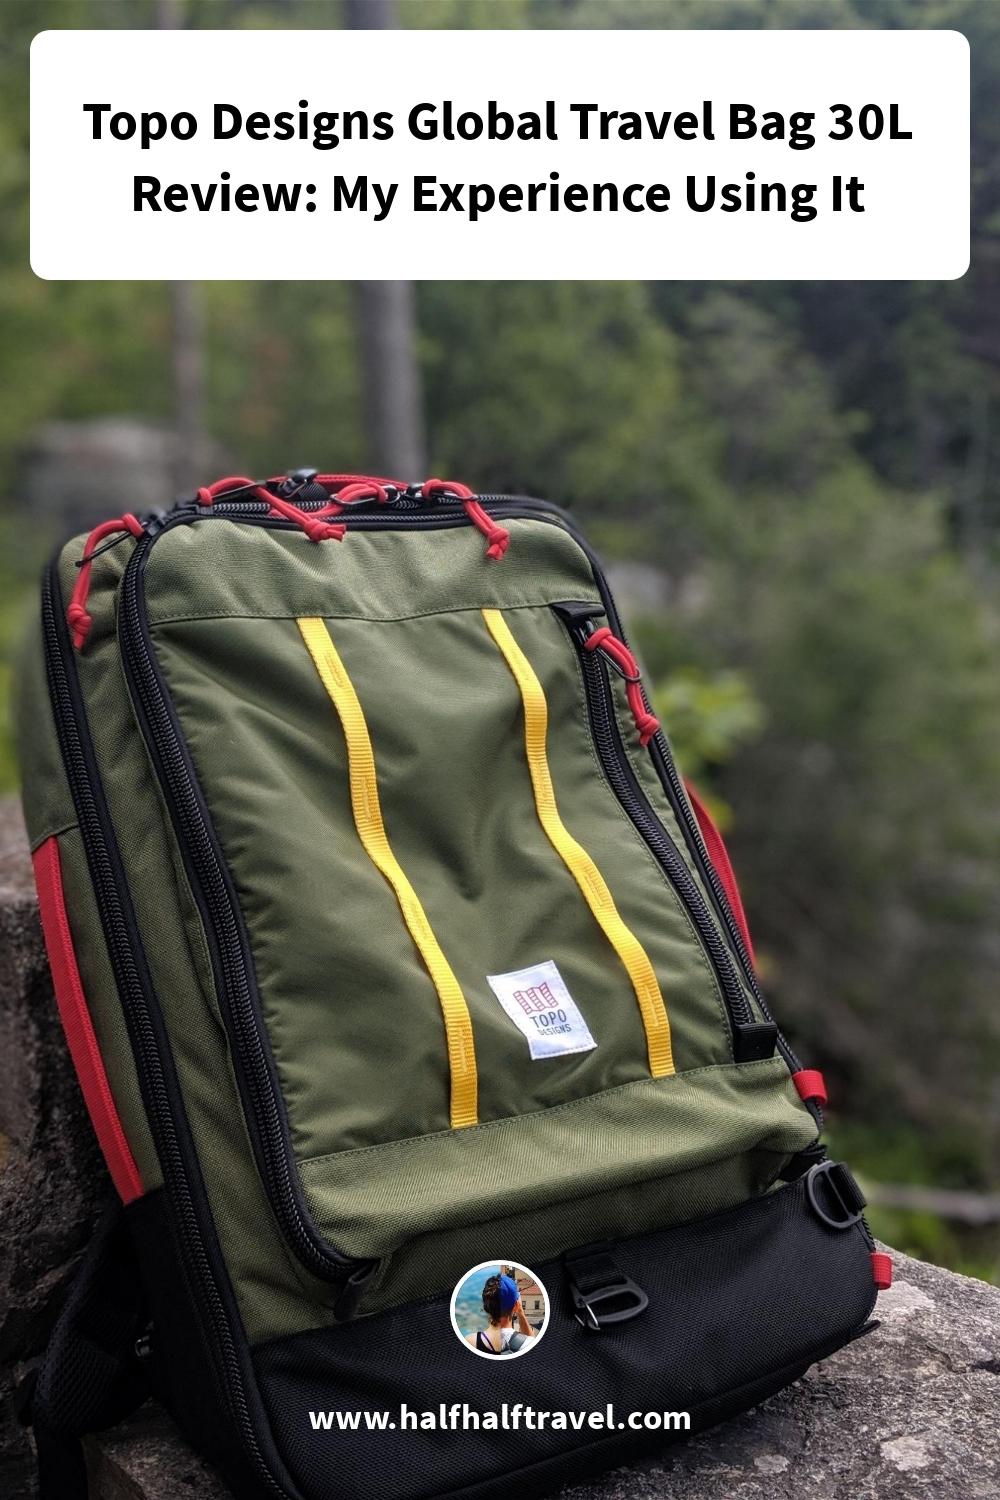 Pinterest image from the 'Topo Designs Global Travel Bag 30L Review: My Experience Using It' article on Half Half Travel